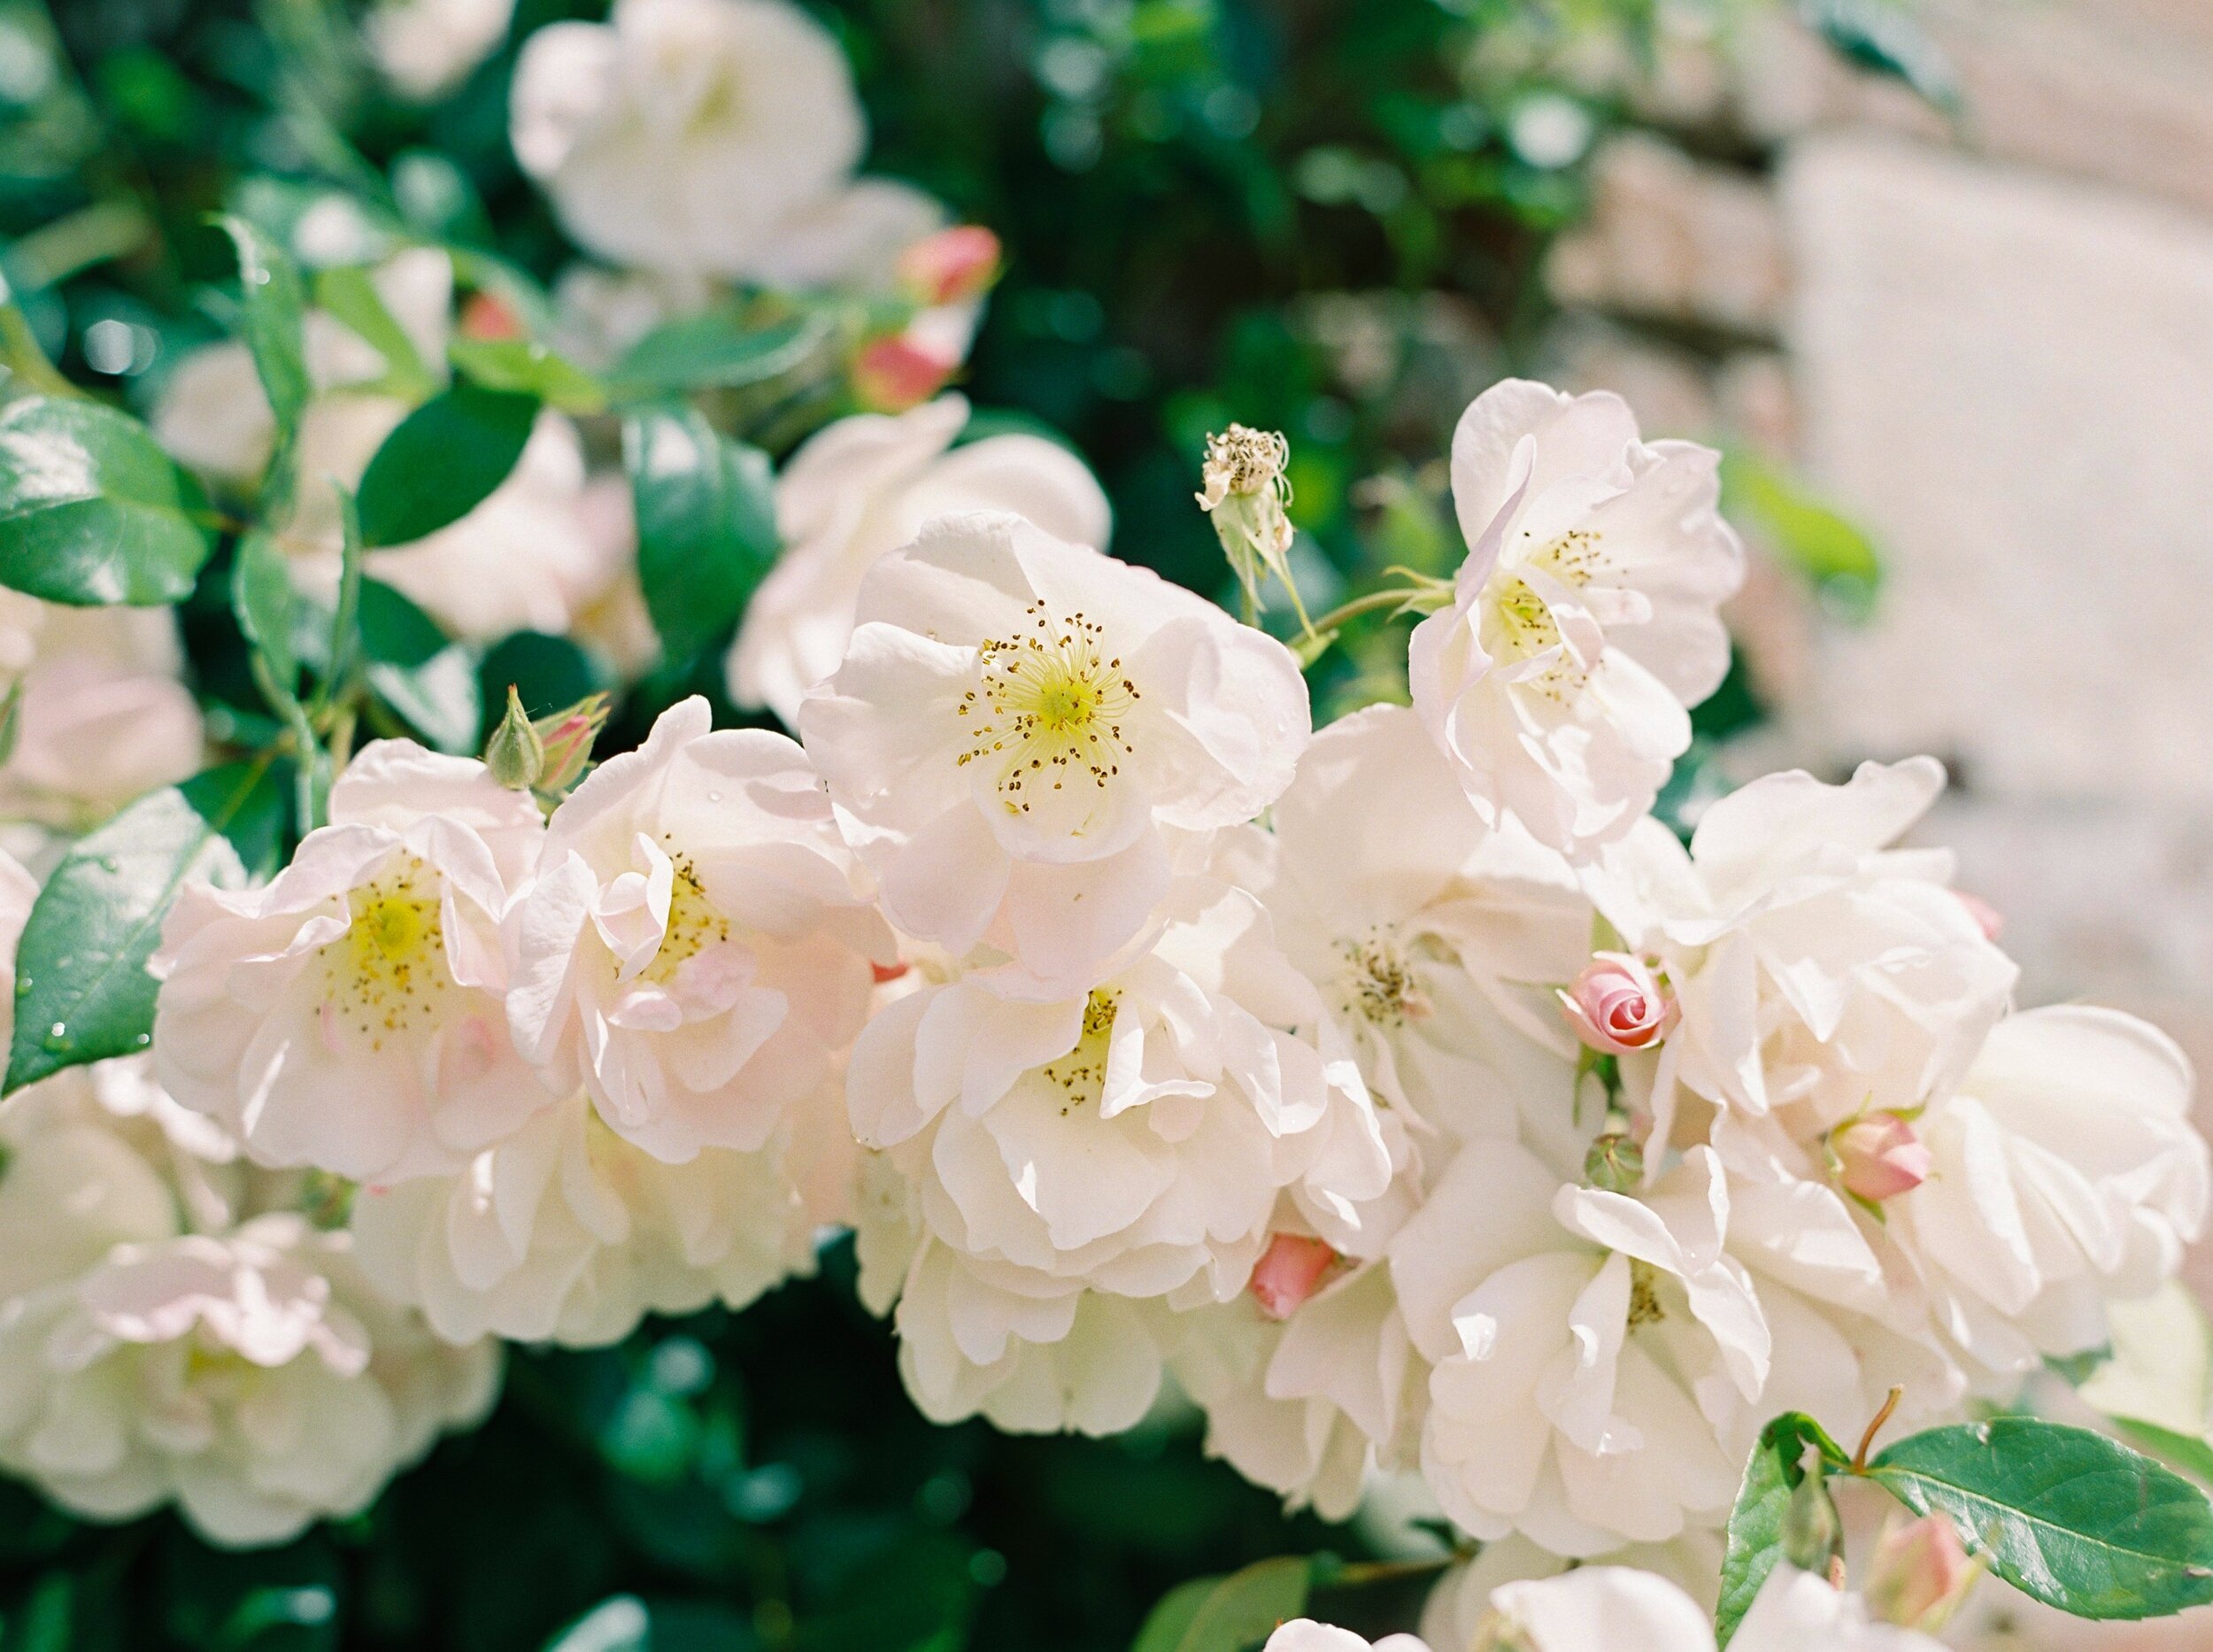  Garden Roses at French Chateau wedding | Paris wedding photographer | fine art film photographer 